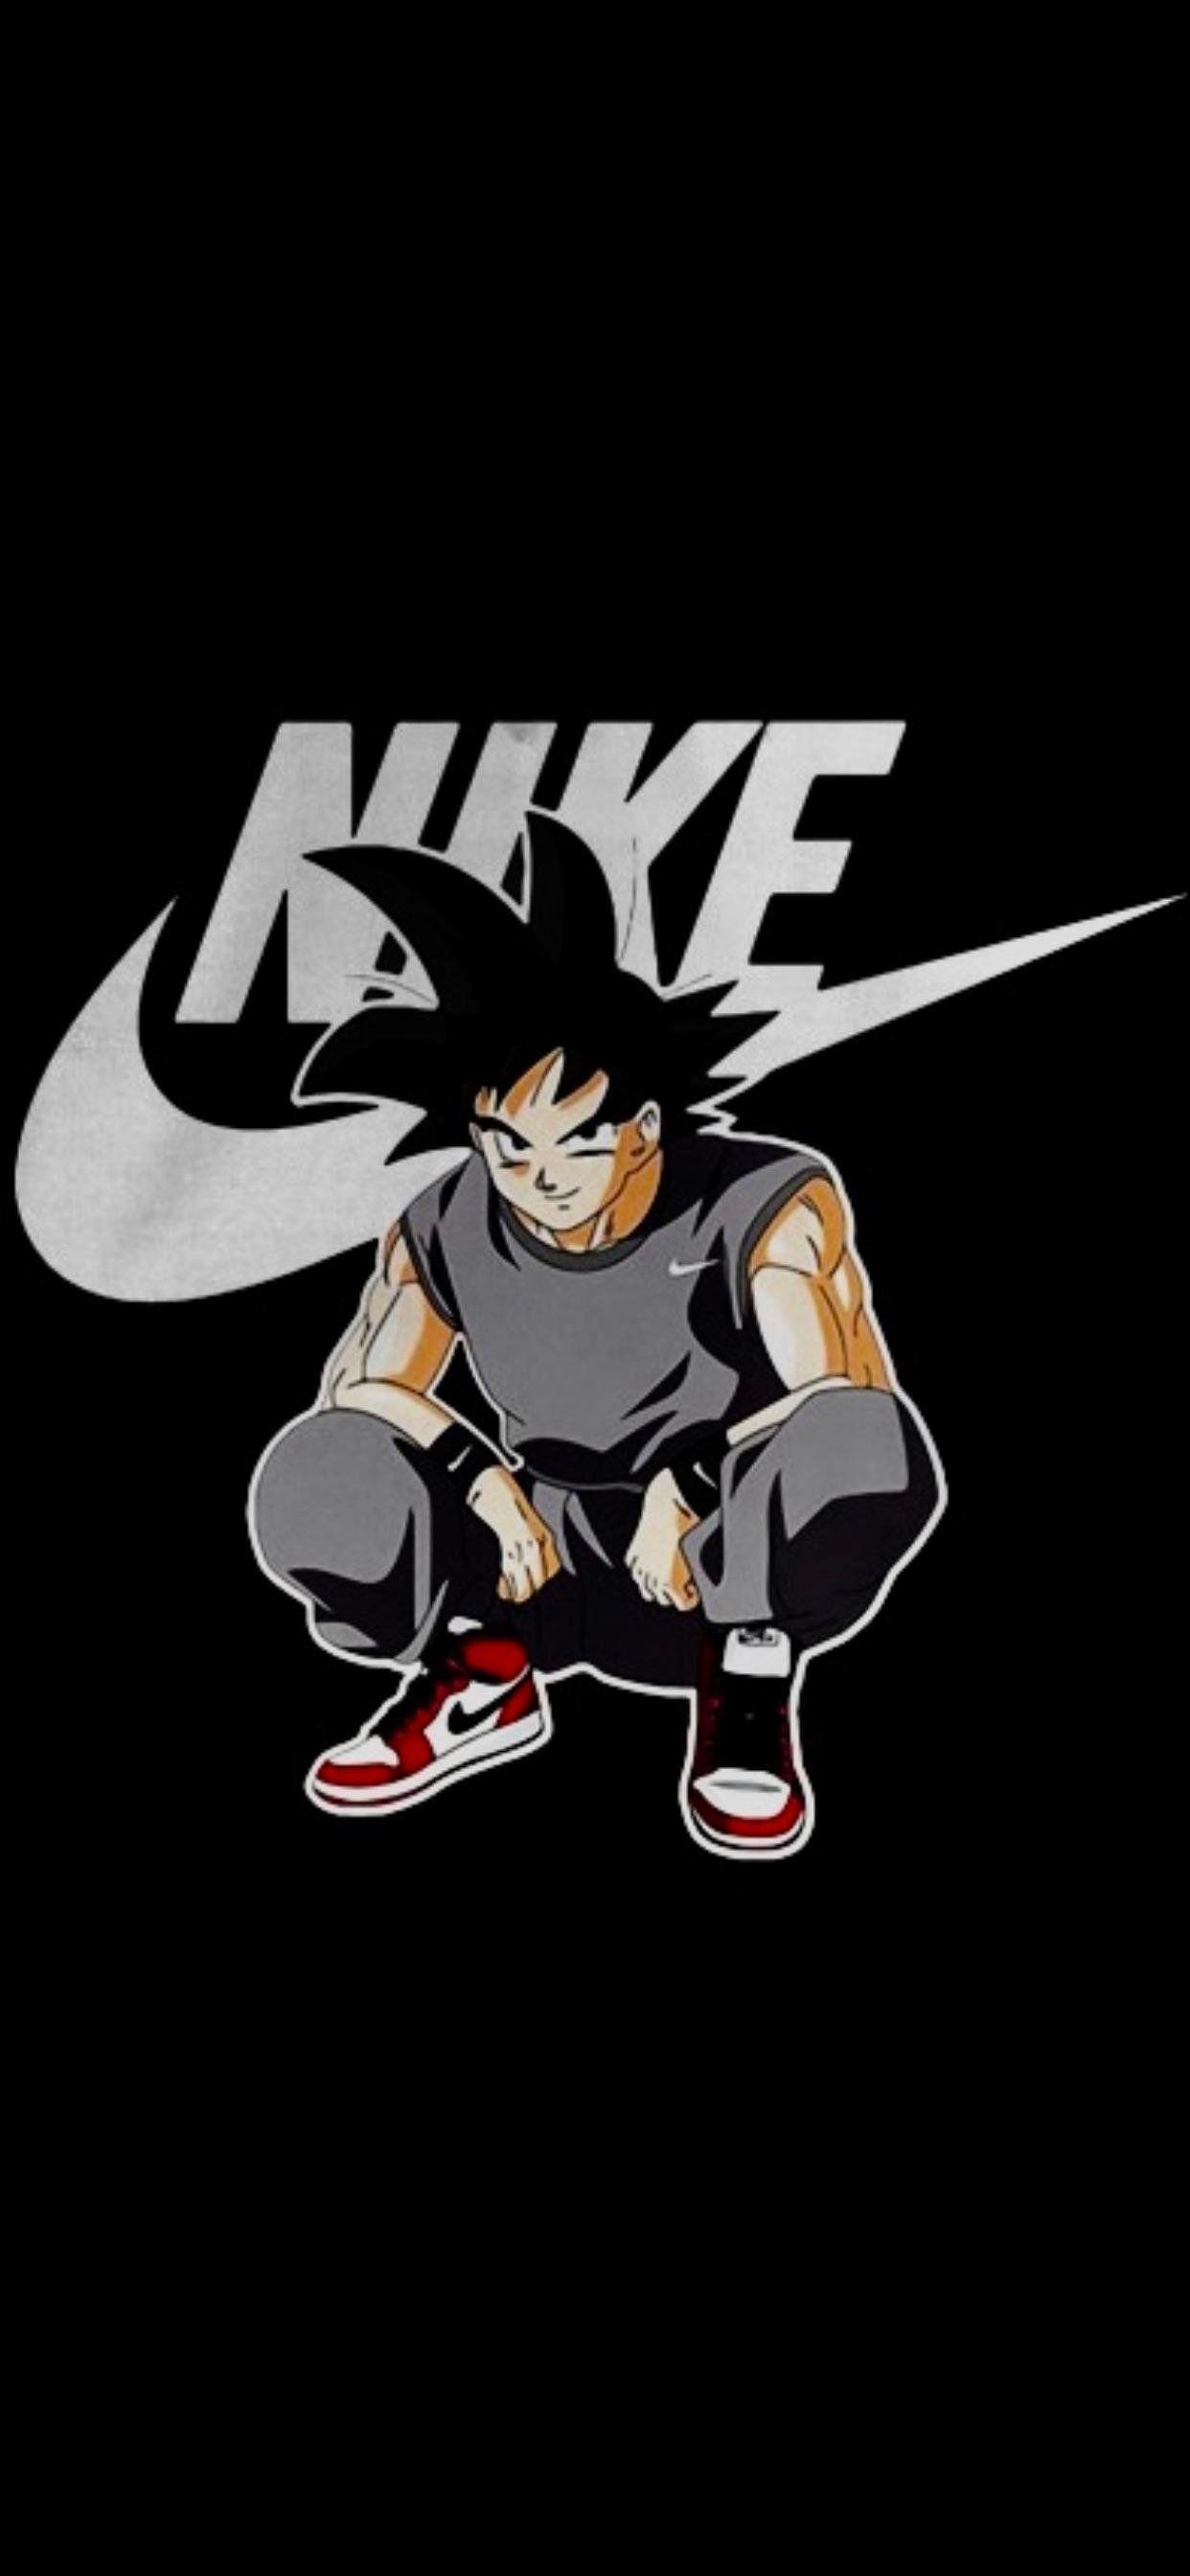 Anime Nike Wallpapers - Top Free Anime Nike Backgrounds - WallpaperAccess